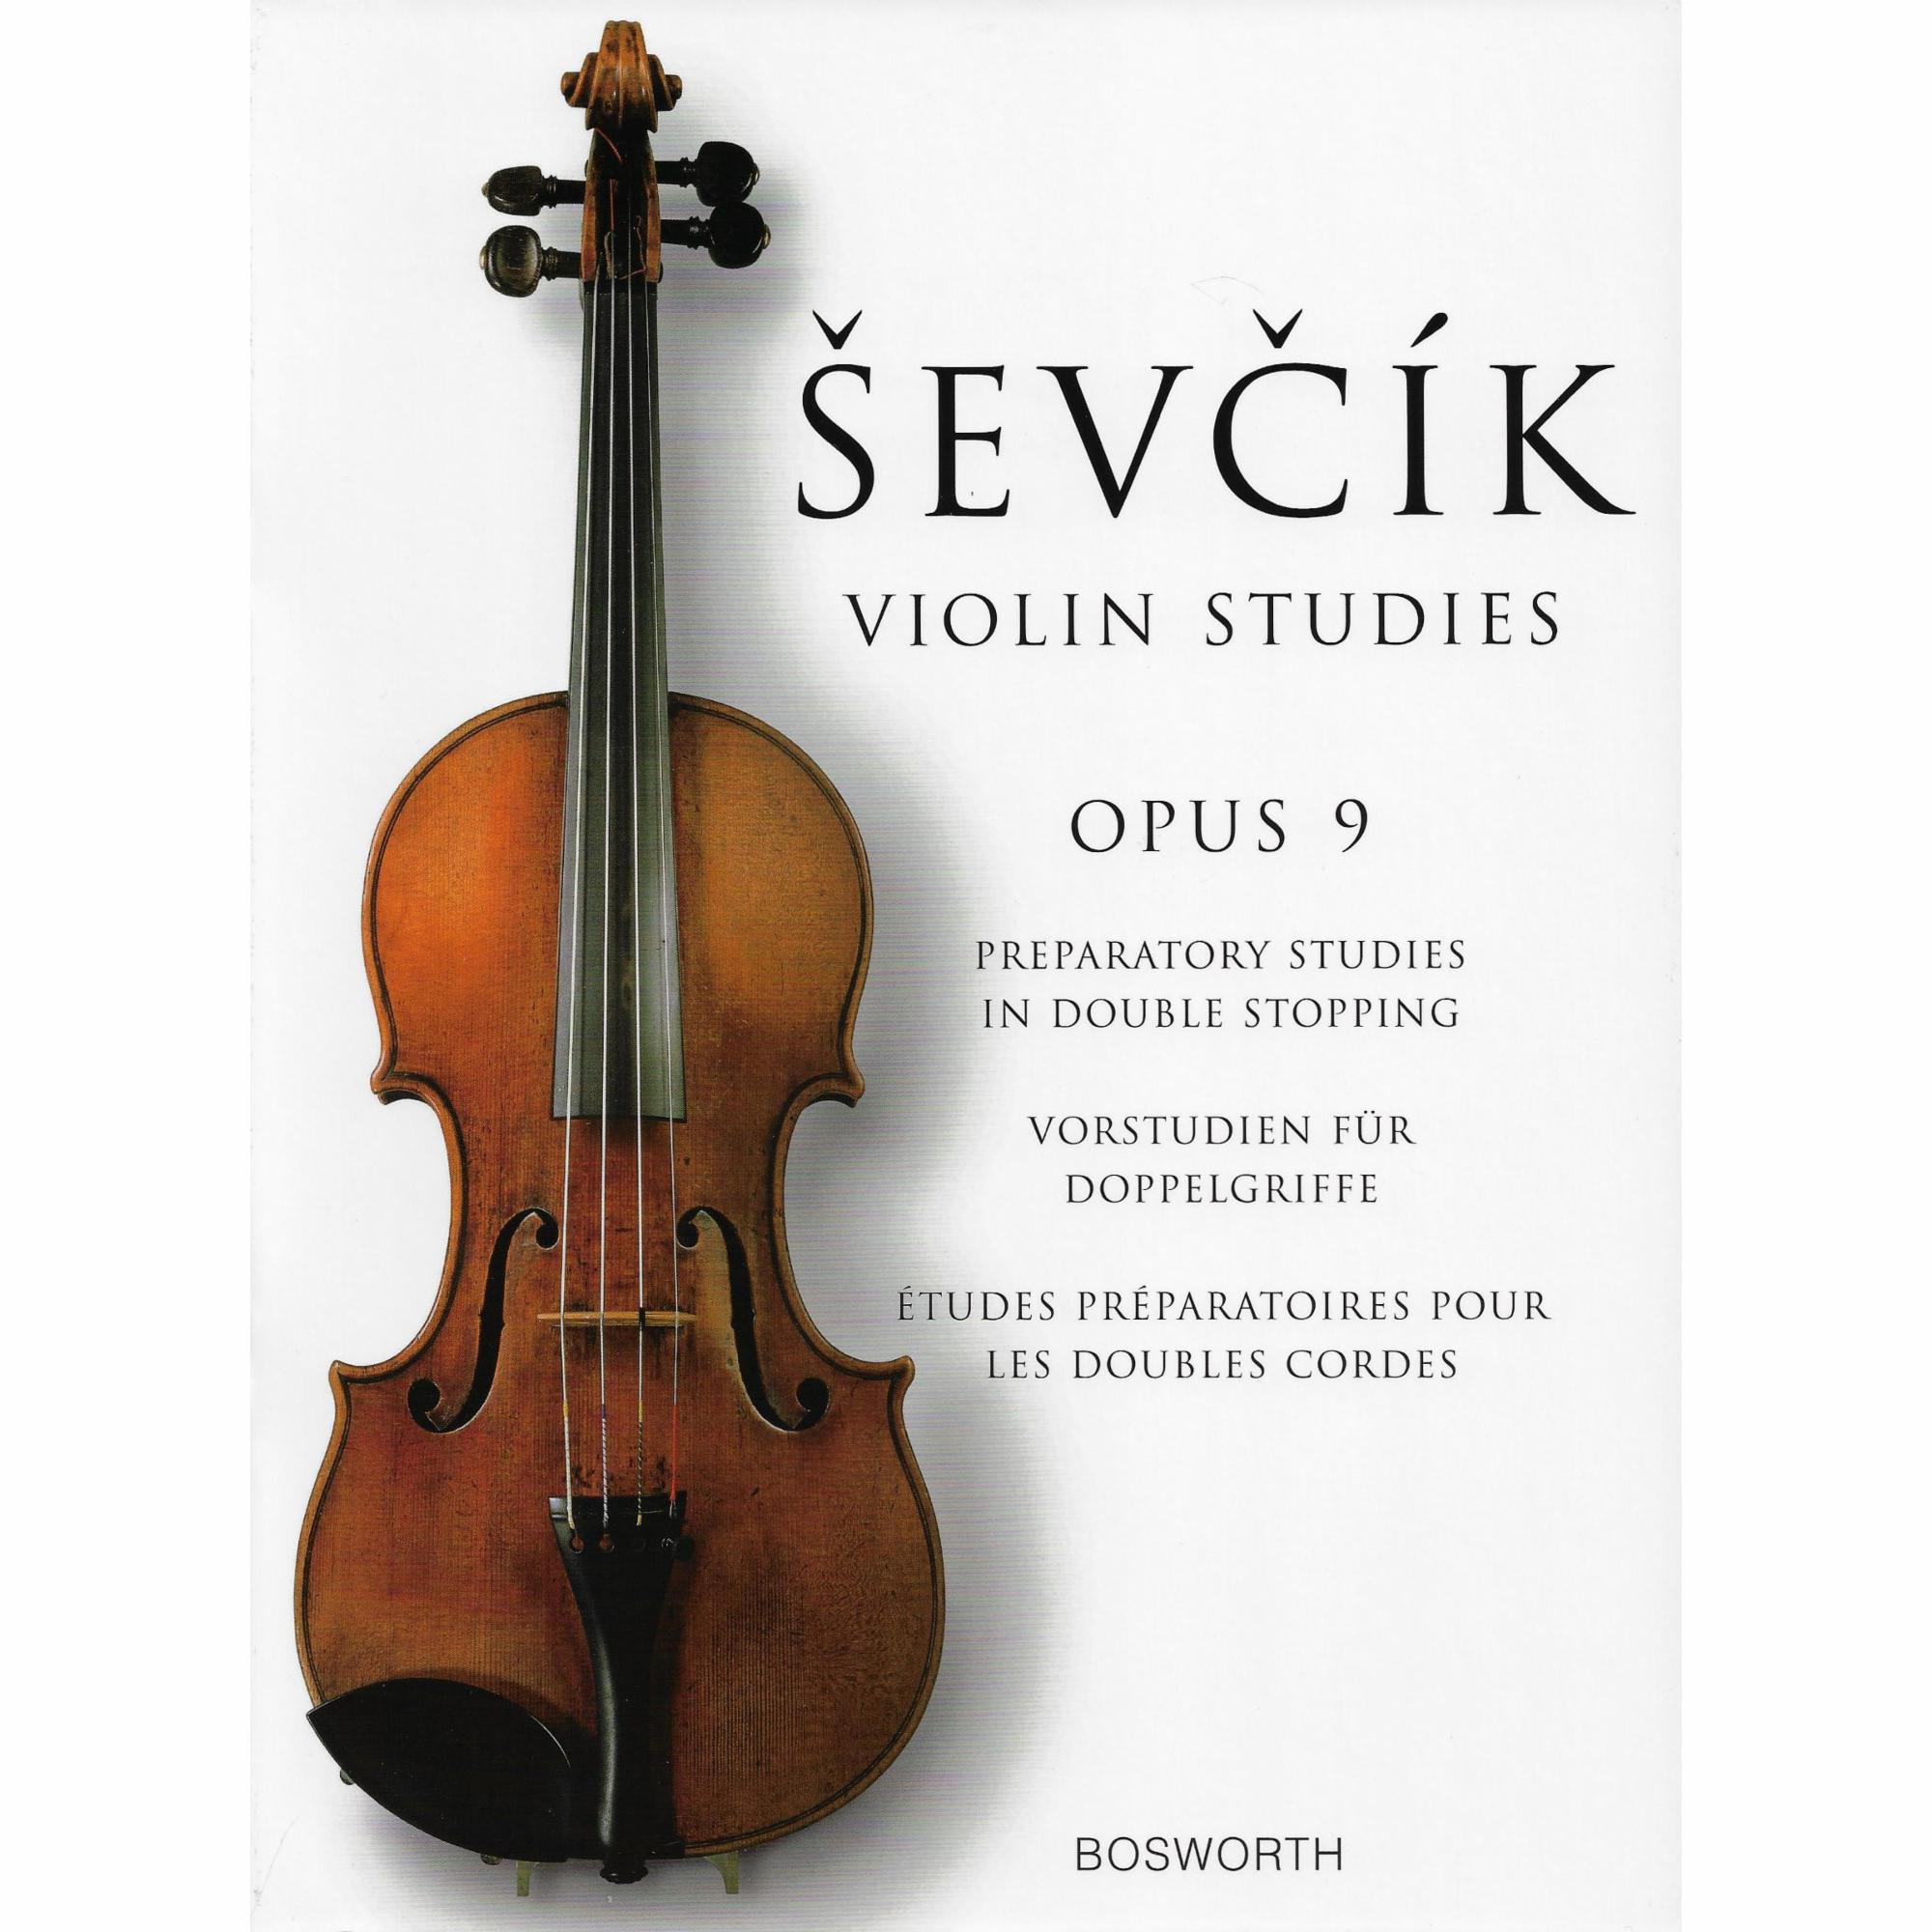 Sevcik -- Preparatory Studies in Double Stopping, Op. 9 for Violin